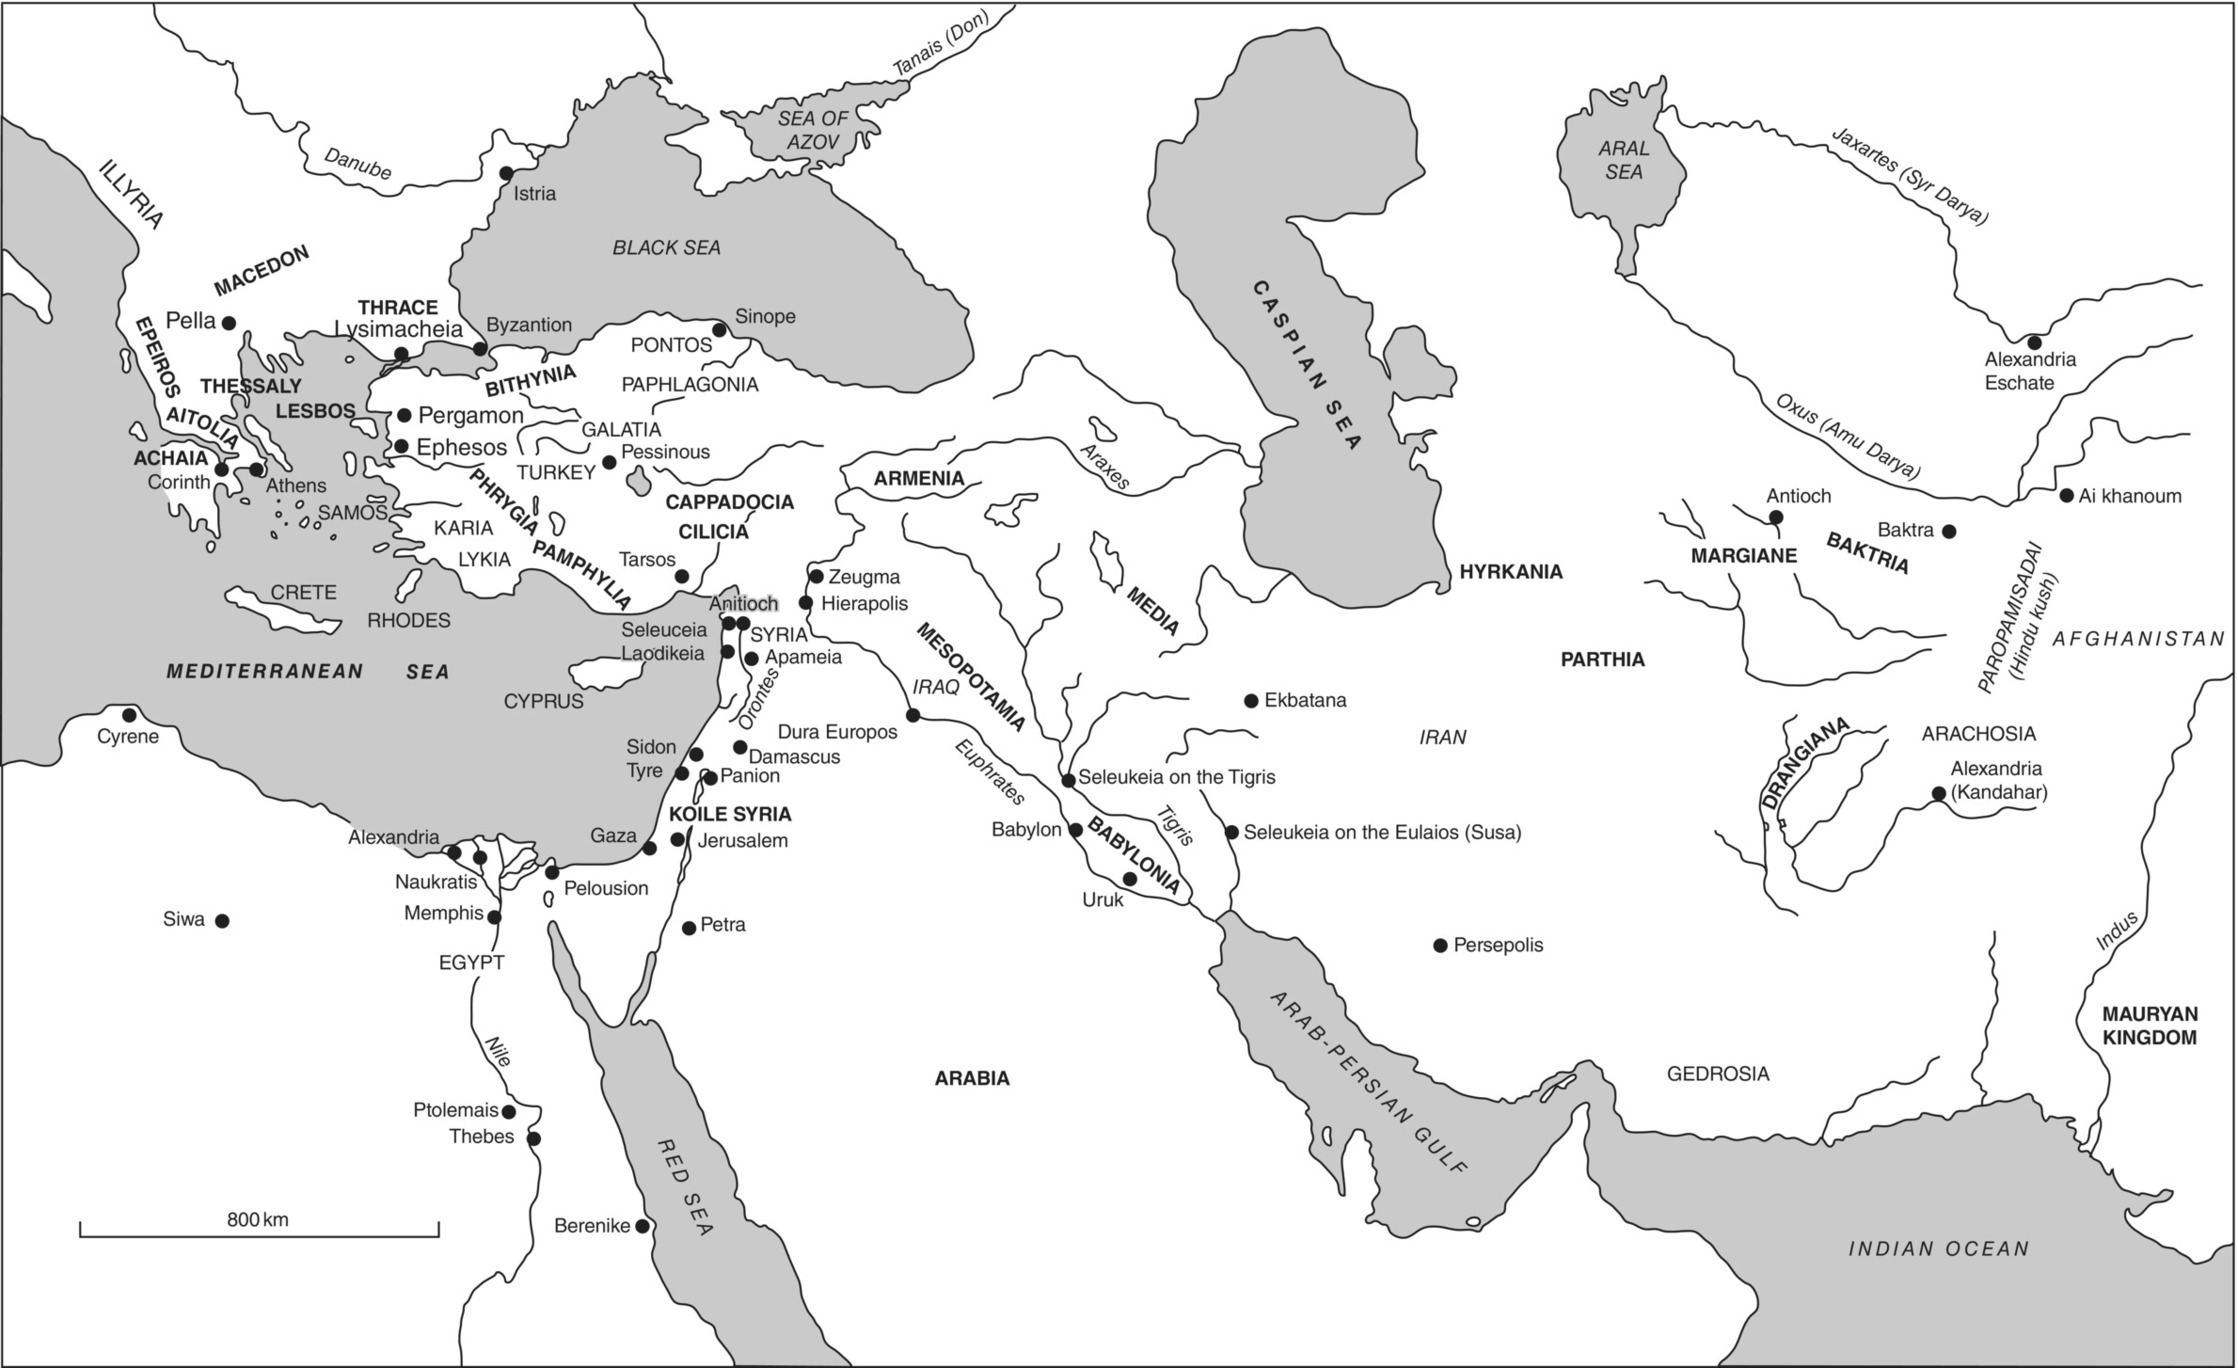 Map of the Hellenistic Kingdoms displaying shaded areas for Black Sea, Mediterranean Sea, Red Sea, Arab-Persian Gulf, etc. and dot markers for Berenike, Thebes, Ptolemais, Siwa, Memphis, Alexandria, Gaza, etc.